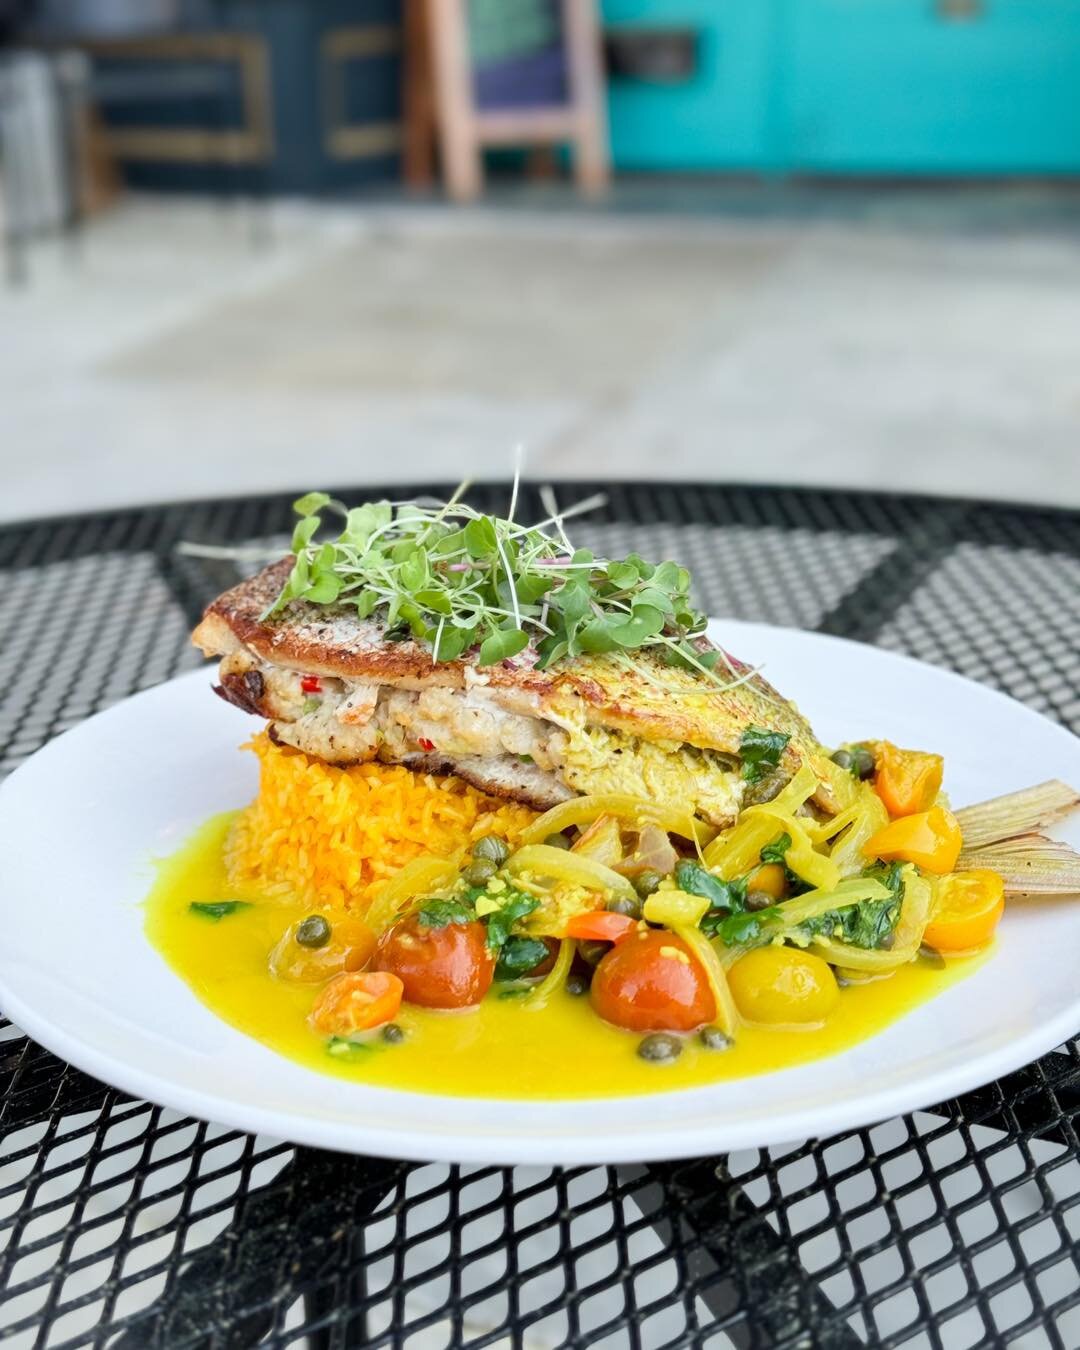 🐟 Dive into deliciousness with our latest menu addition: Pargo Pescado! Savor the exquisite flavors of seared red snapper paired perfectly with aromatic yellow saffron rice and a tantalizing turmeric tomato sauce. A culinary journey awaits at Pineap